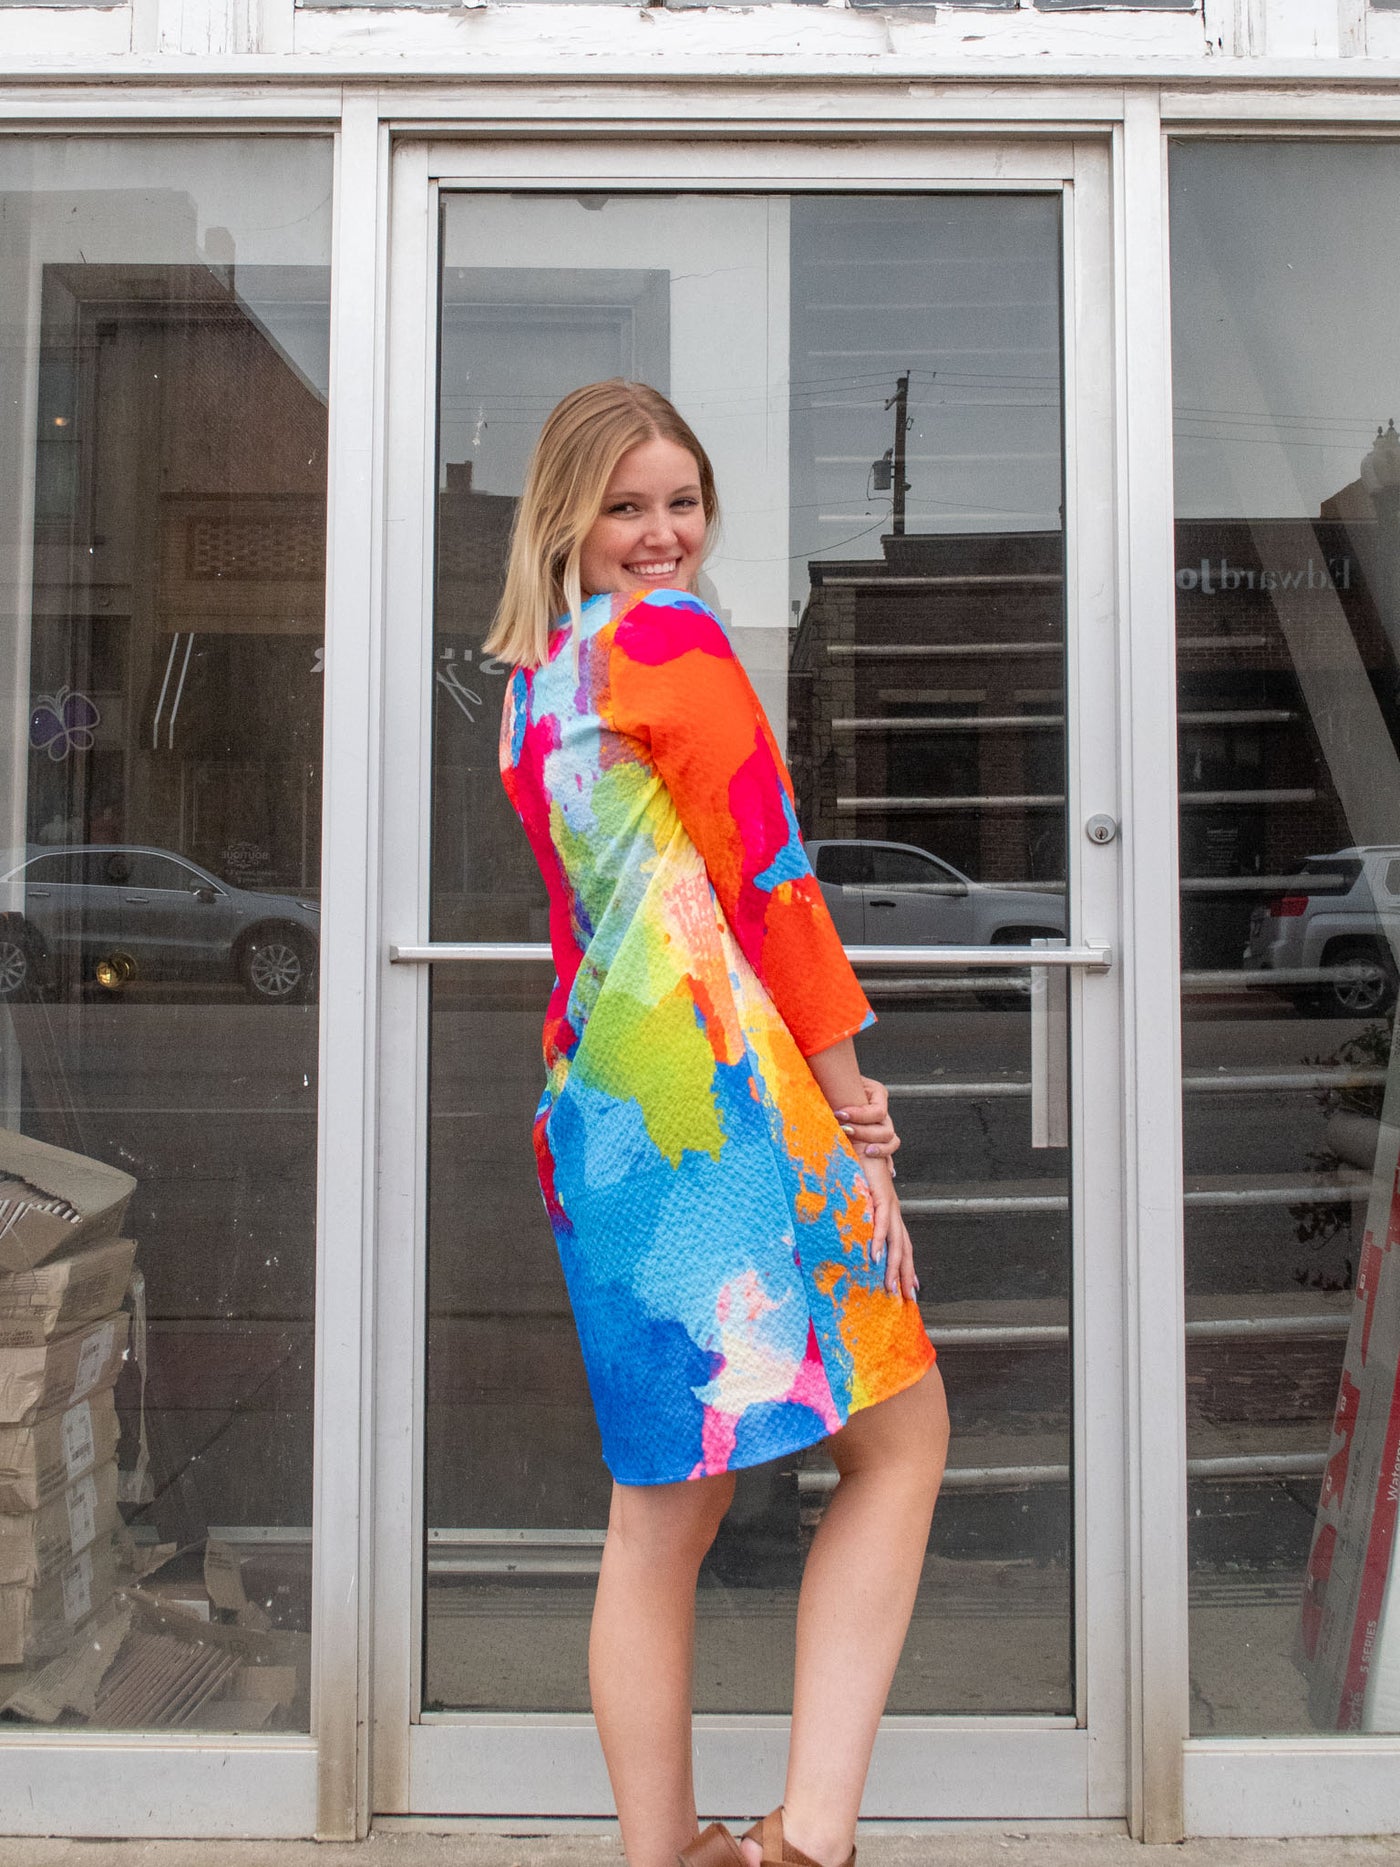 A model wearing a mid thigh length dress that features pink, blue, green, orange, and yellow watercolor details and 3/4 sleeve length. The model paired it with brown platform sandals.